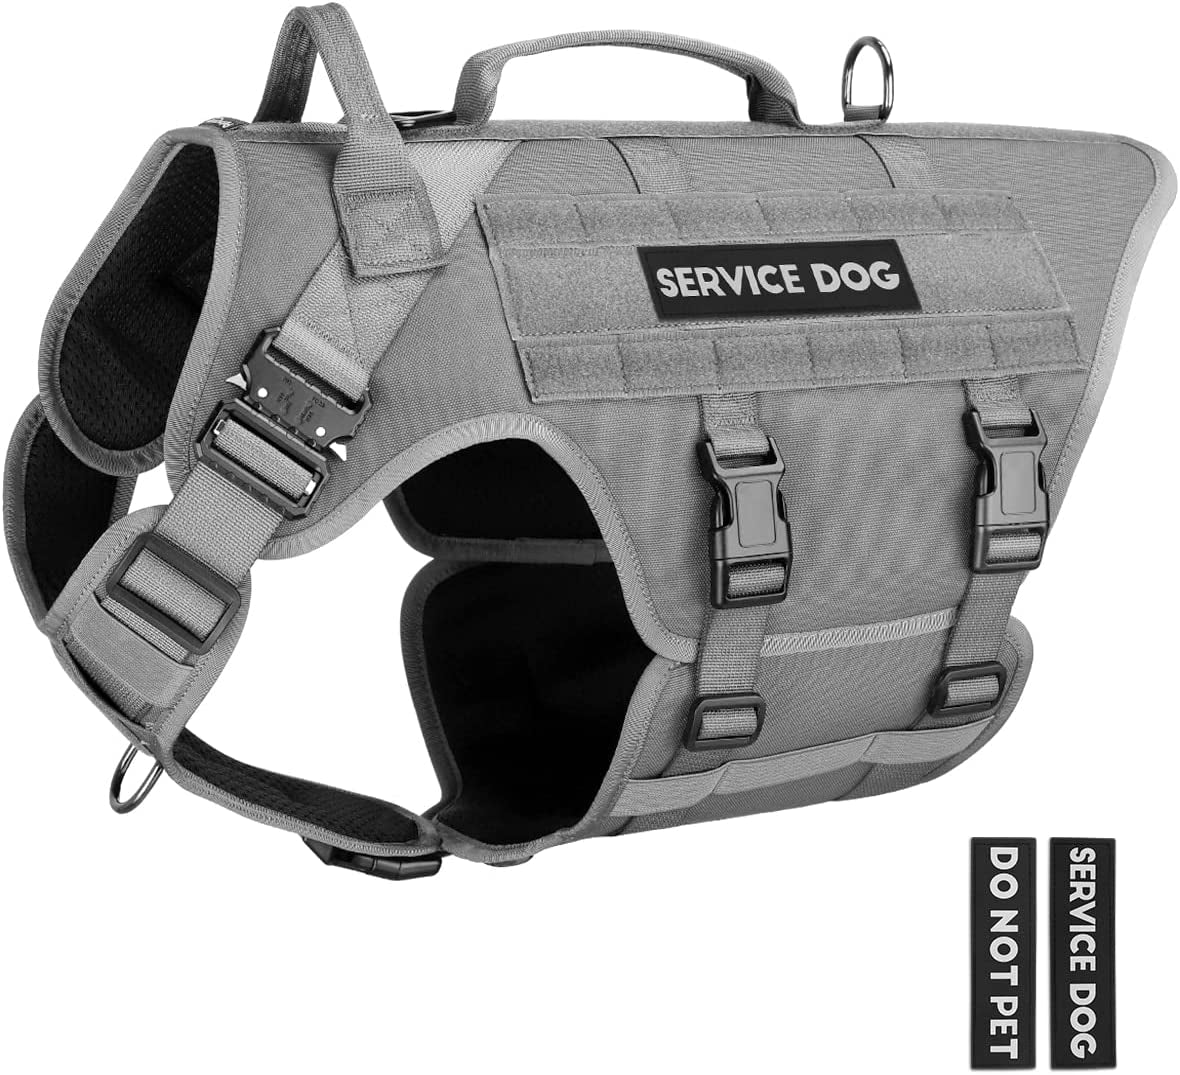 Tactical Dog Harness - PETNANNY Service Dog Vest for Large Dogs Fully Body Coverage in Training Dog Harness with 2 Reflective Dog Patches, Handle, Hook and Loop Panels, Walking Hunting Dog MOLLE Vest Animals & Pet Supplies > Pet Supplies > Dog Supplies > Dog Apparel PETNANNY Grey Medium 